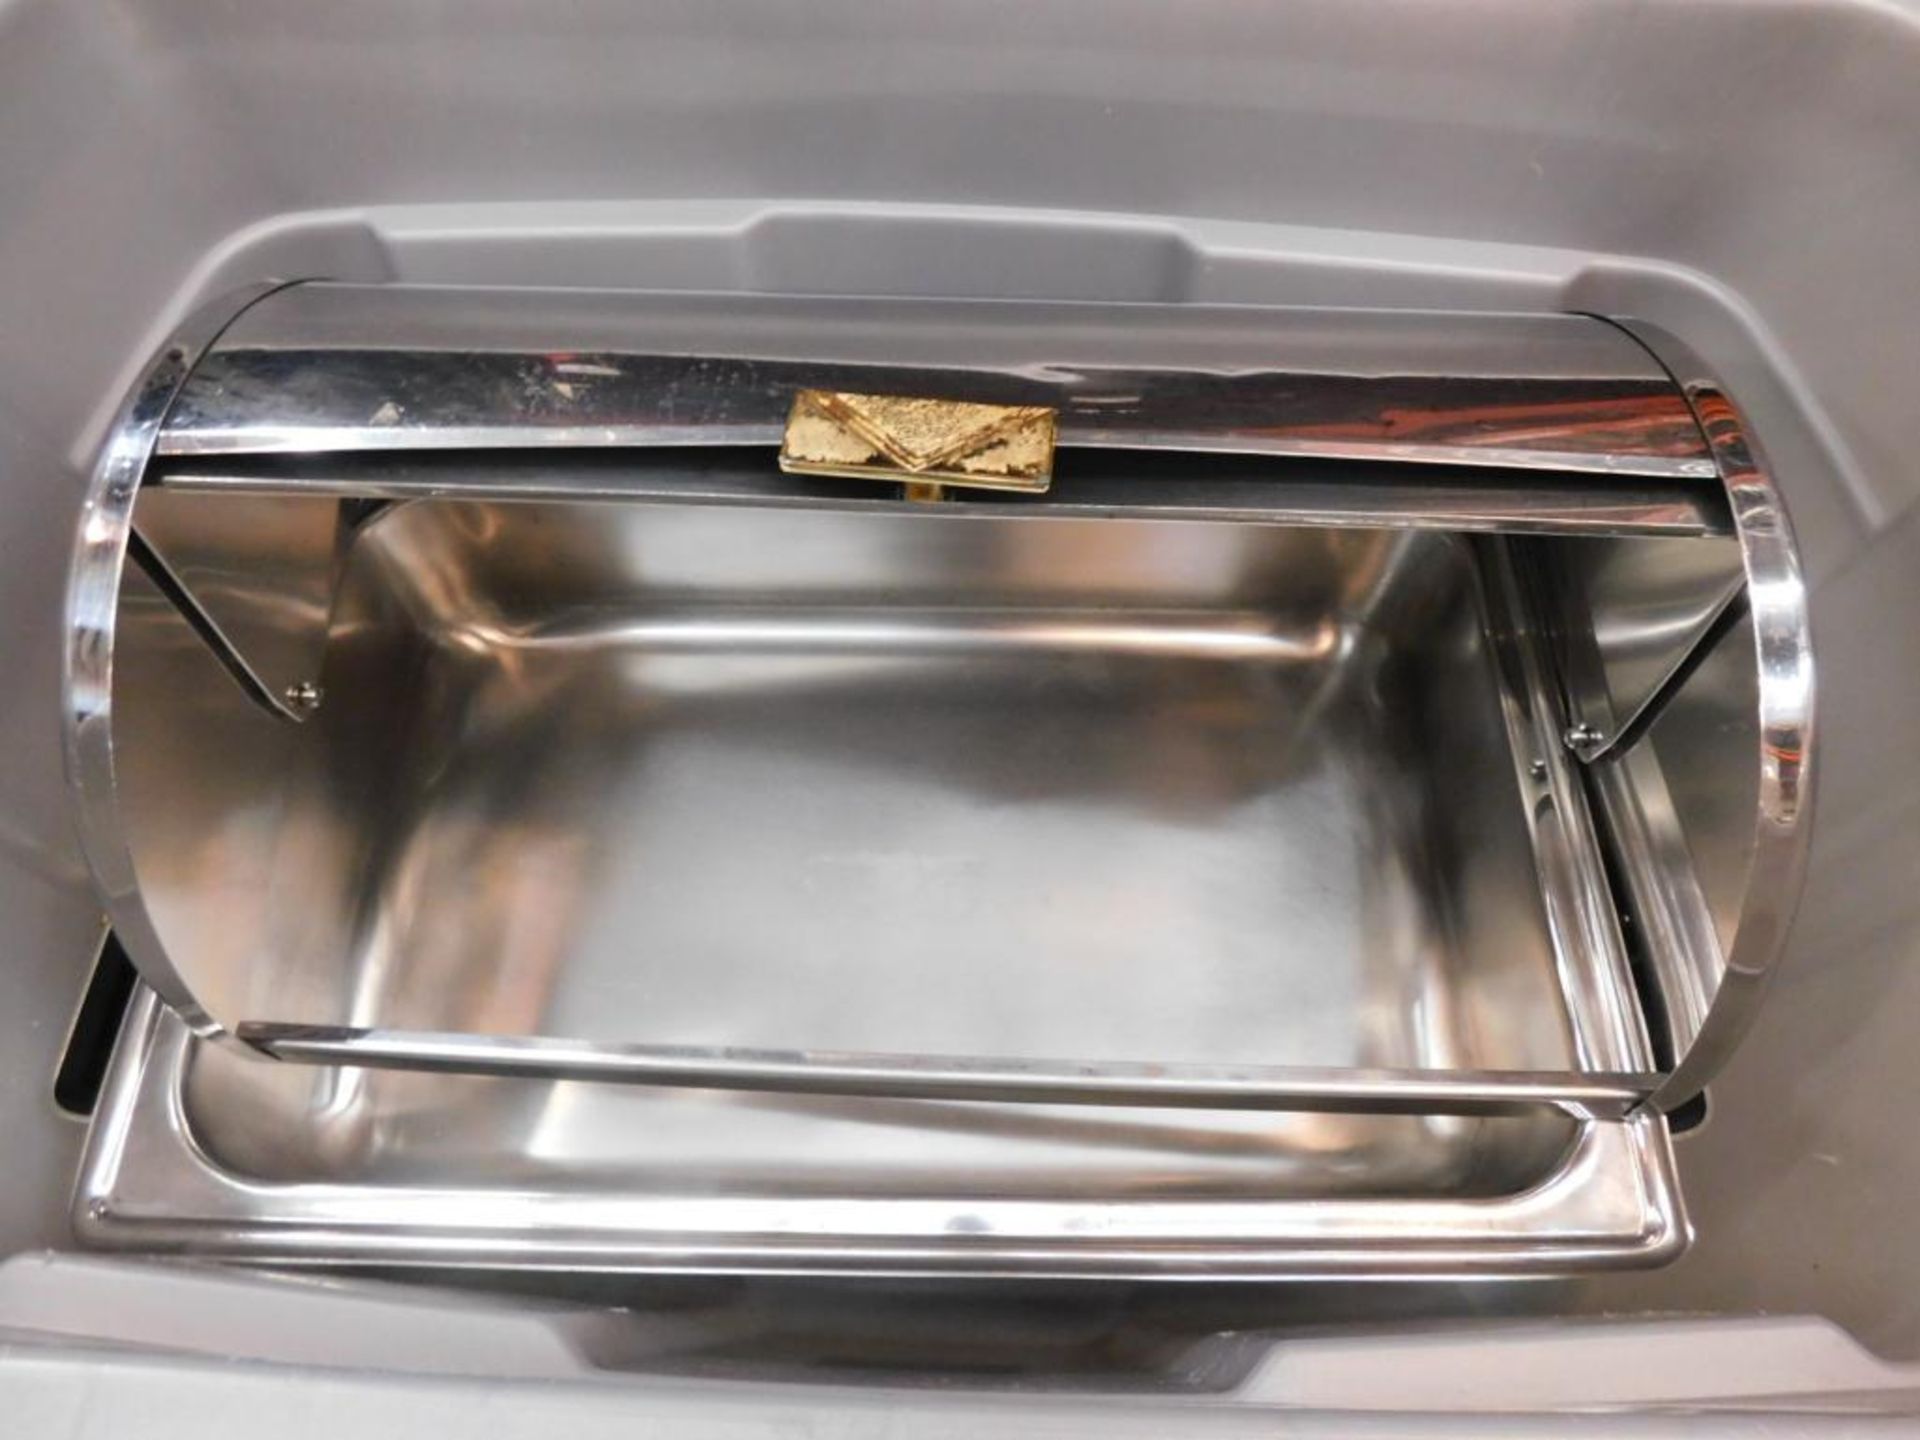 12” x 20" Roll Top Chafer Dish (LOCATION: 1766 Waukegan Rd., Glenview, IL 60025) - Image 2 of 2